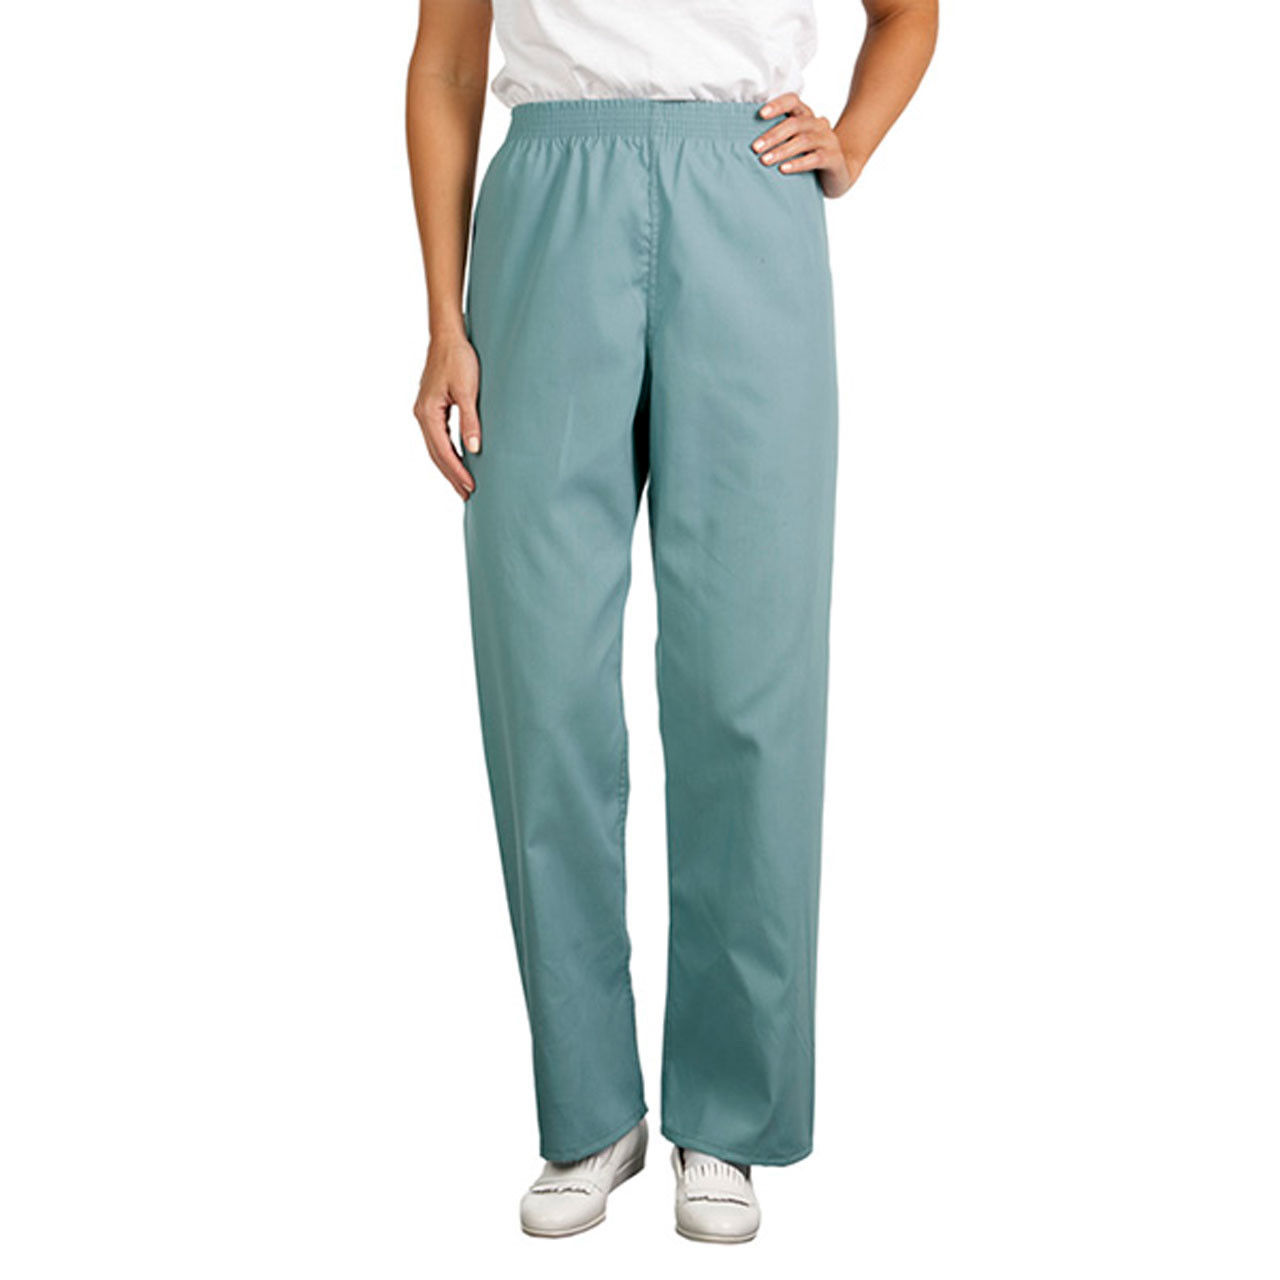 What type of waistband do the scrub pants have?